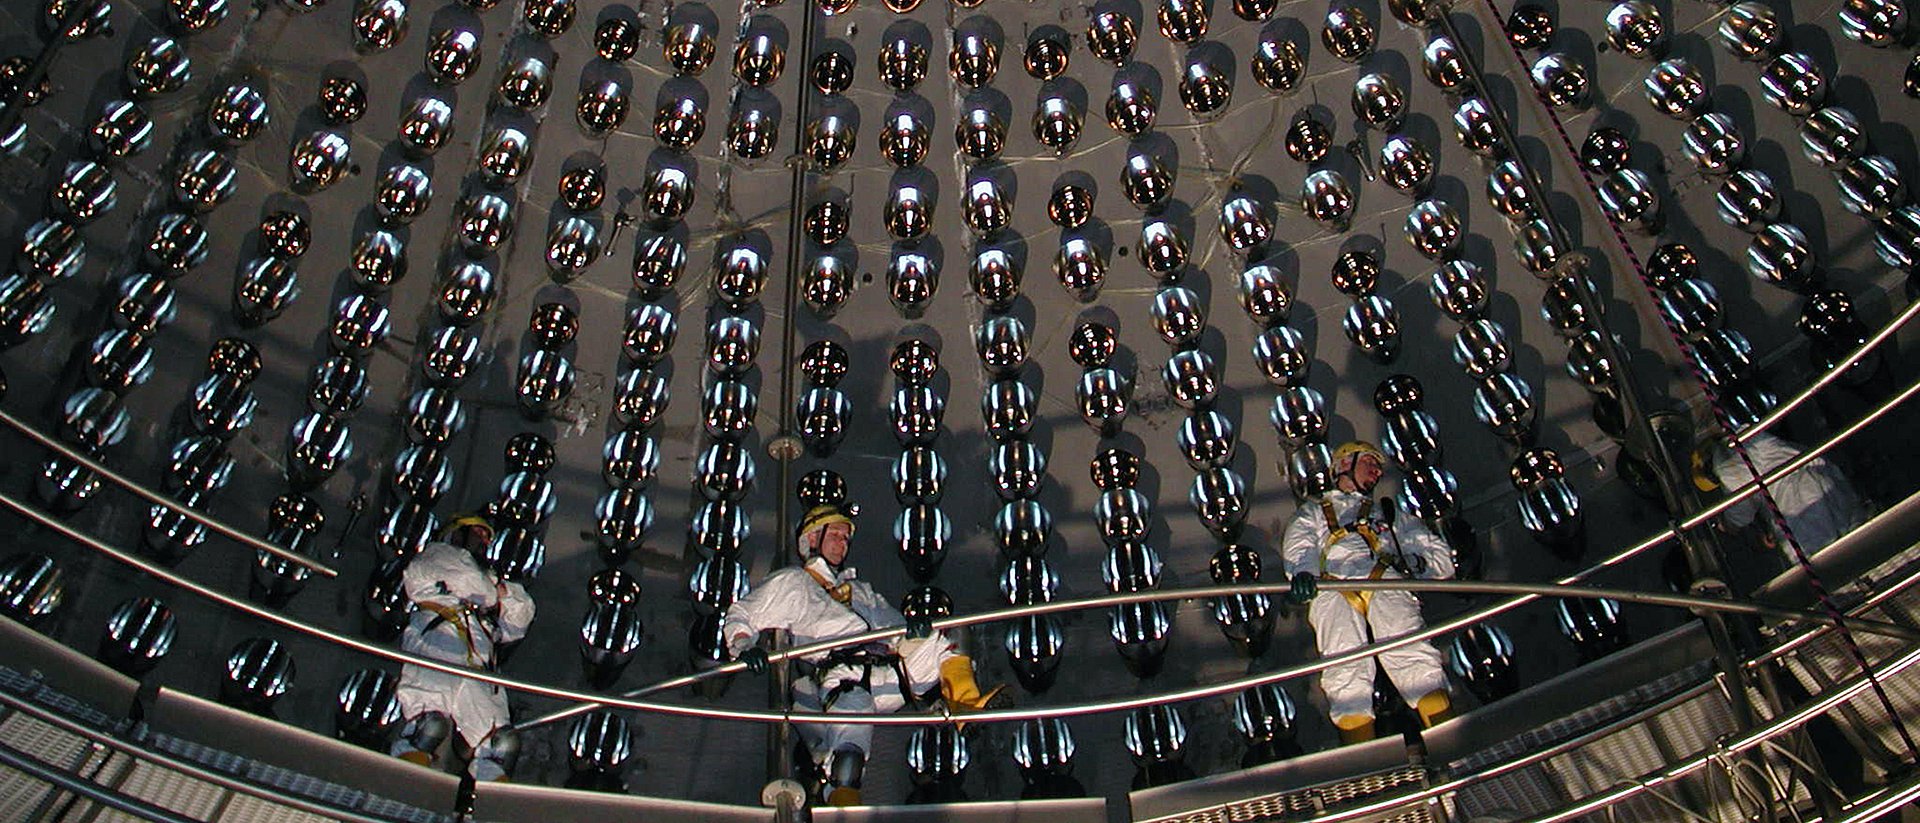 Inside the Borexino detector. More than 1000 meters of rock above the Laboratori Nazionali del Gran Sasso shields the experiment against a large part of the cosmic radiation, so that neutrinos from the sun can be measured here.